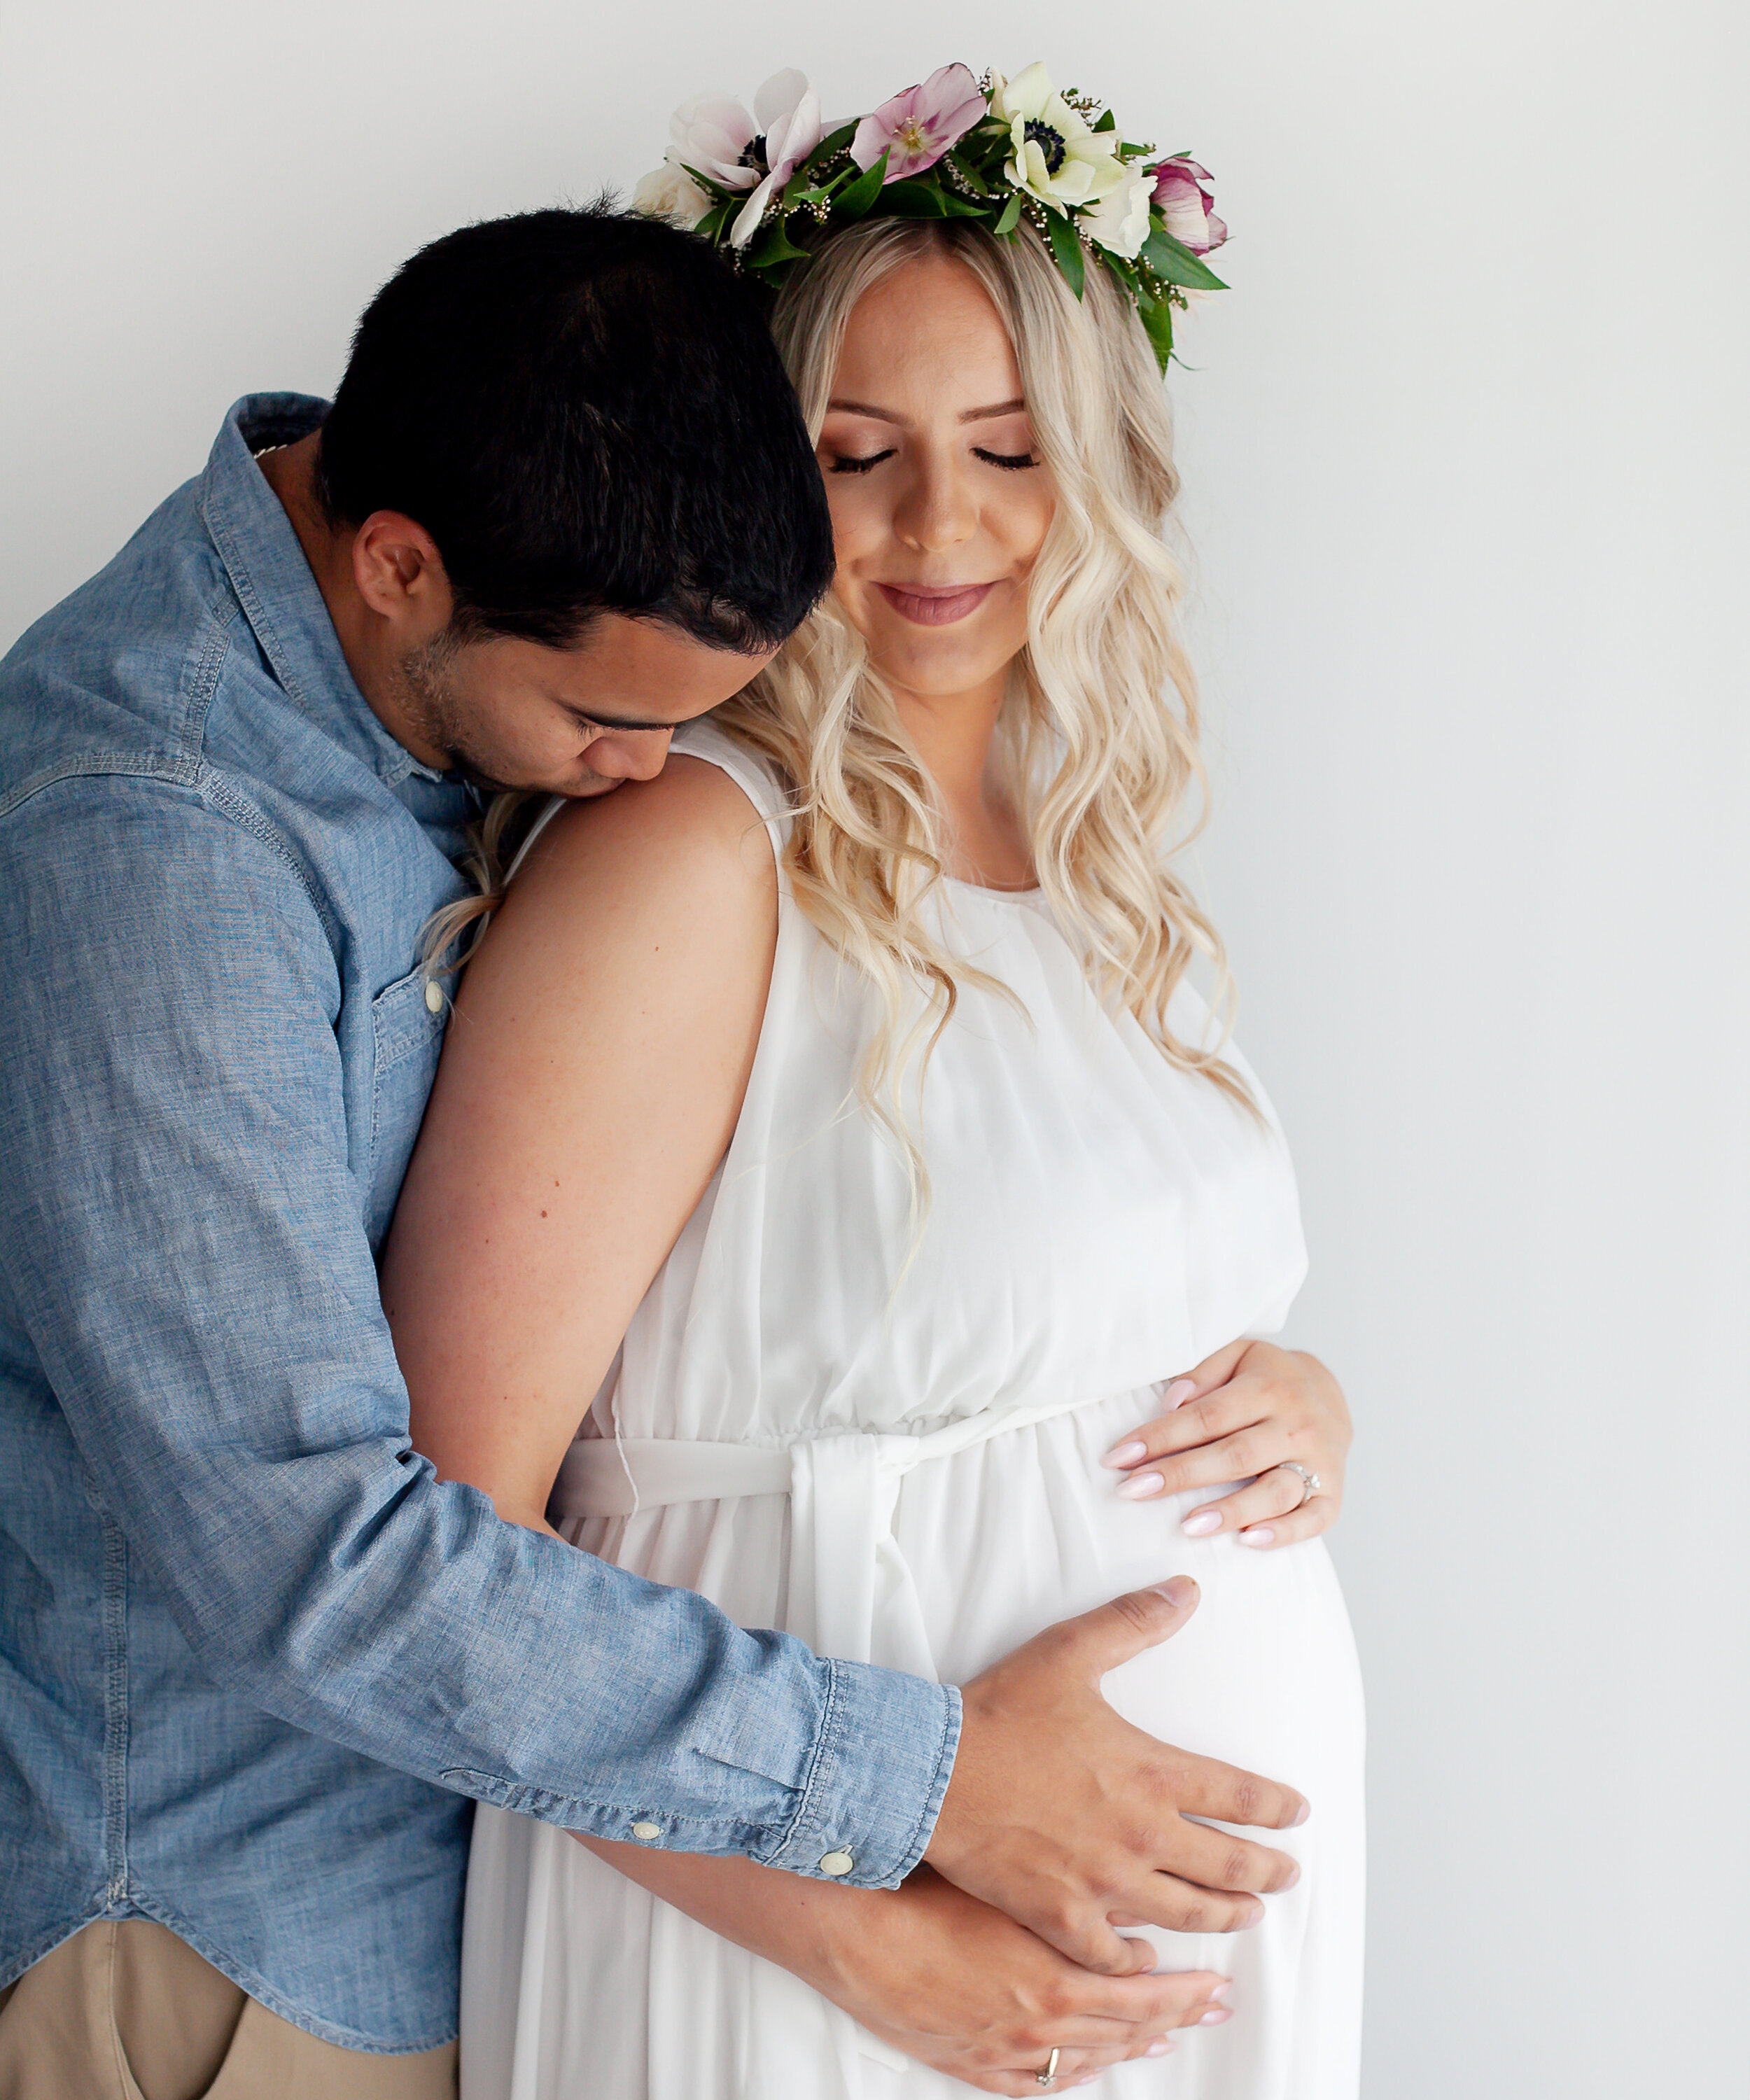 Whitby_Couple_Floral_Maternity_Photographer_Petra_King_Photography